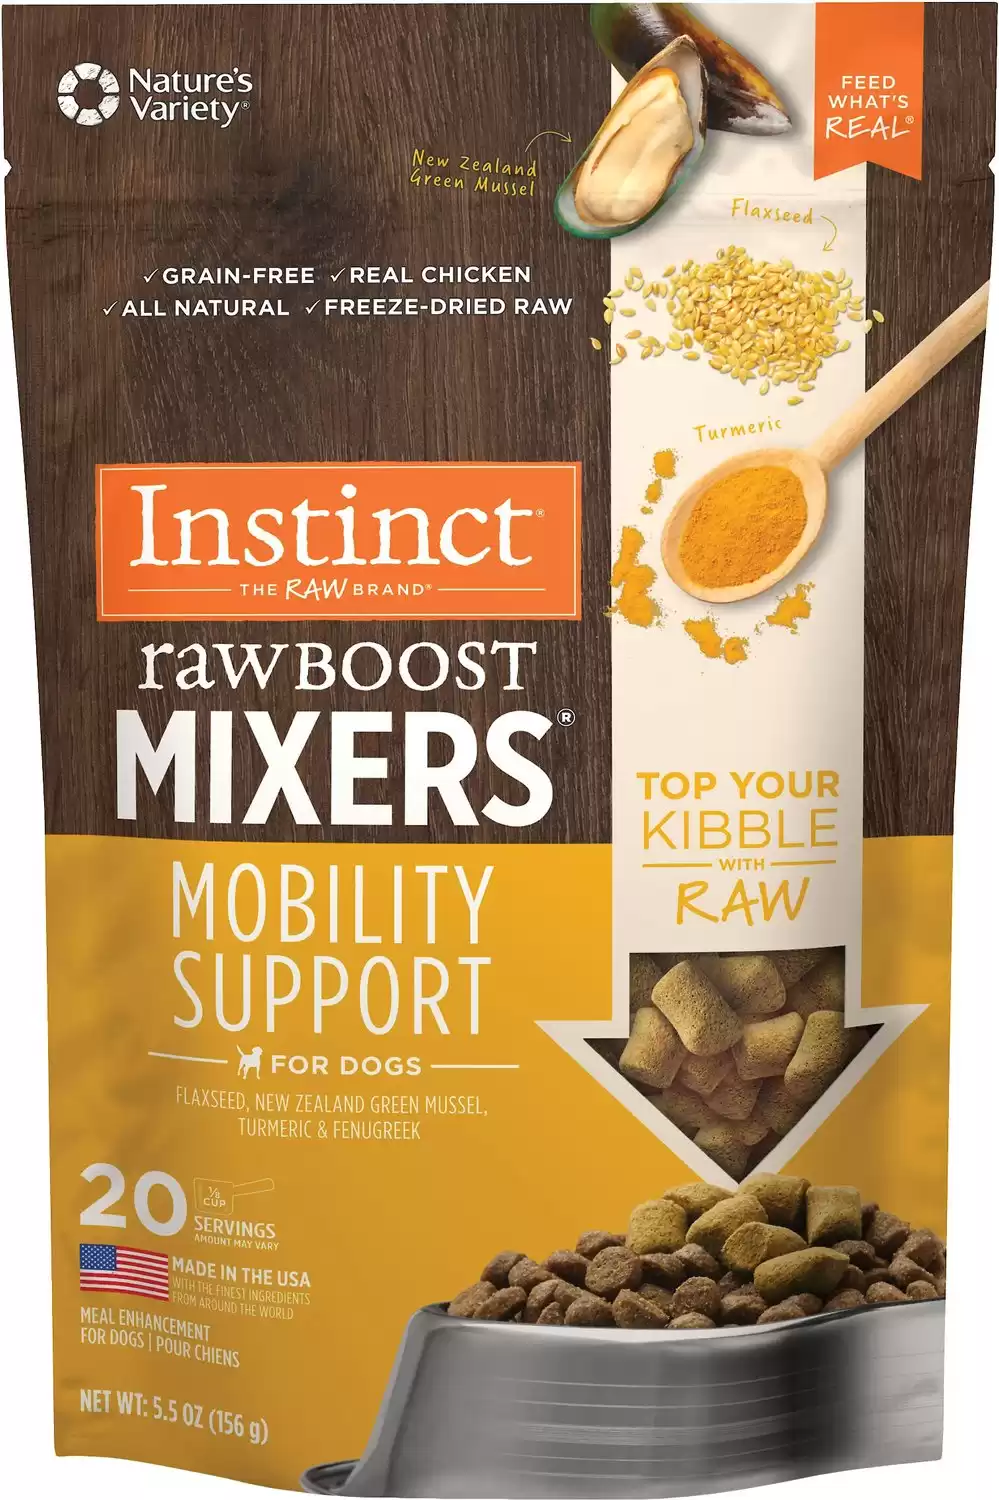 Instinct Freeze Dried Raw Boost Mixers Mobility Support Dog Food Topper